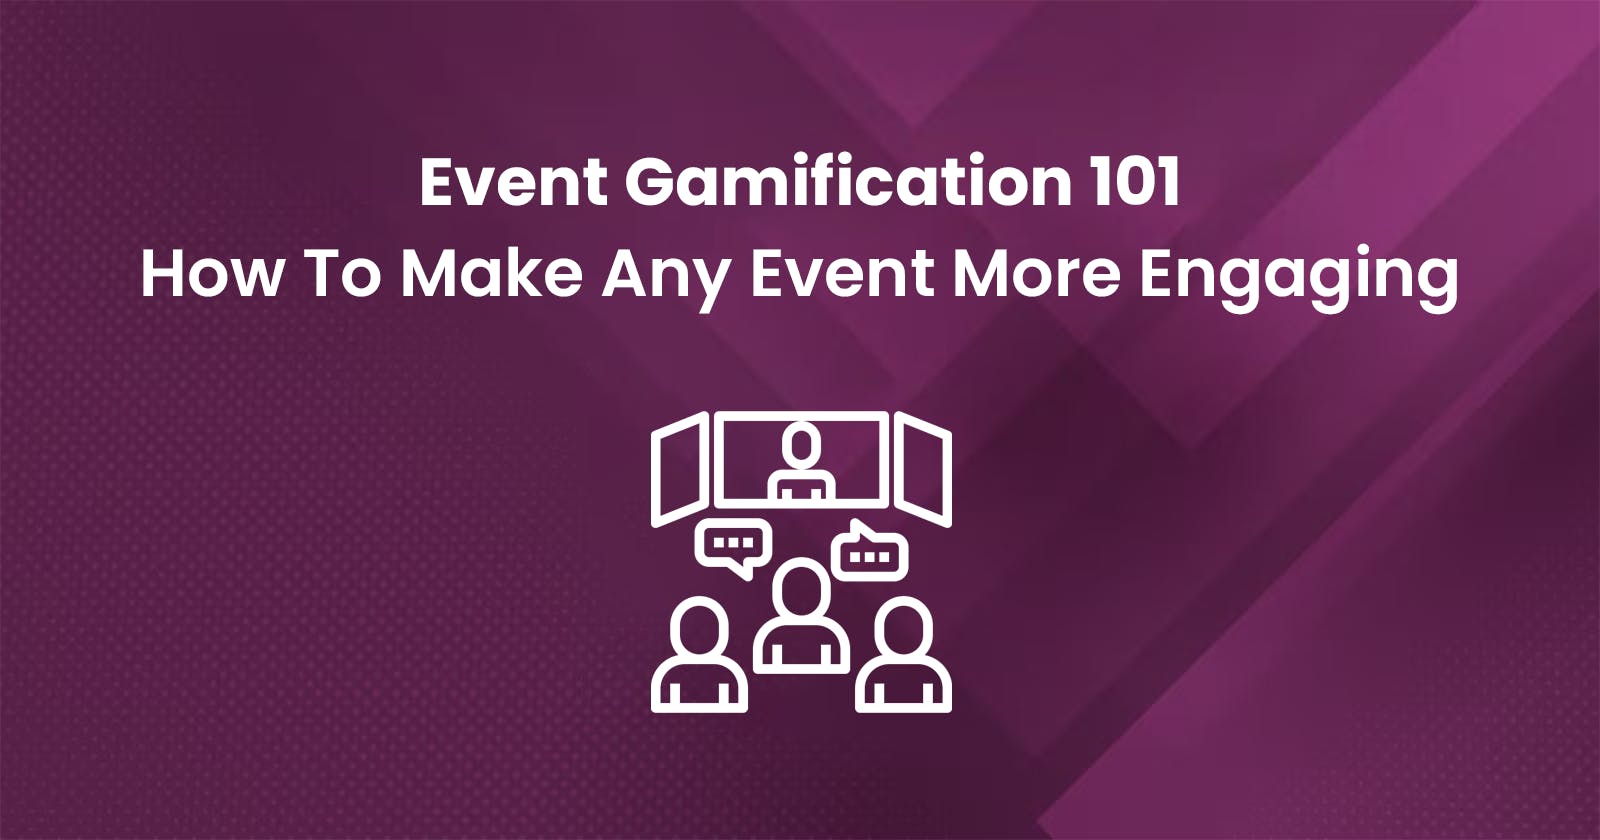 Event Gamification 101: How To Make Any Event More Engaging